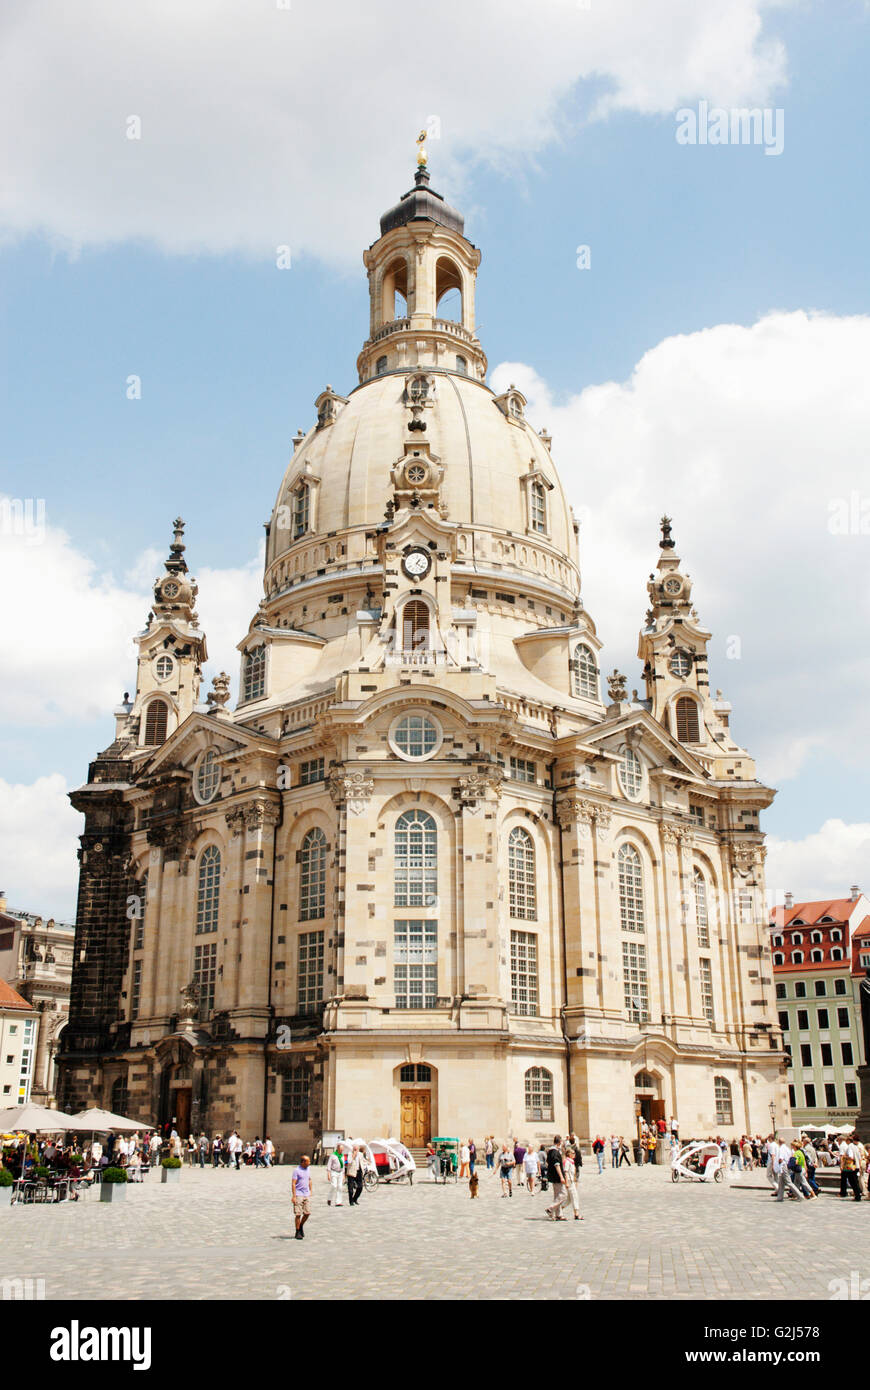 Frauenkirche and Plaza, Dresden, Germany Stock Photo